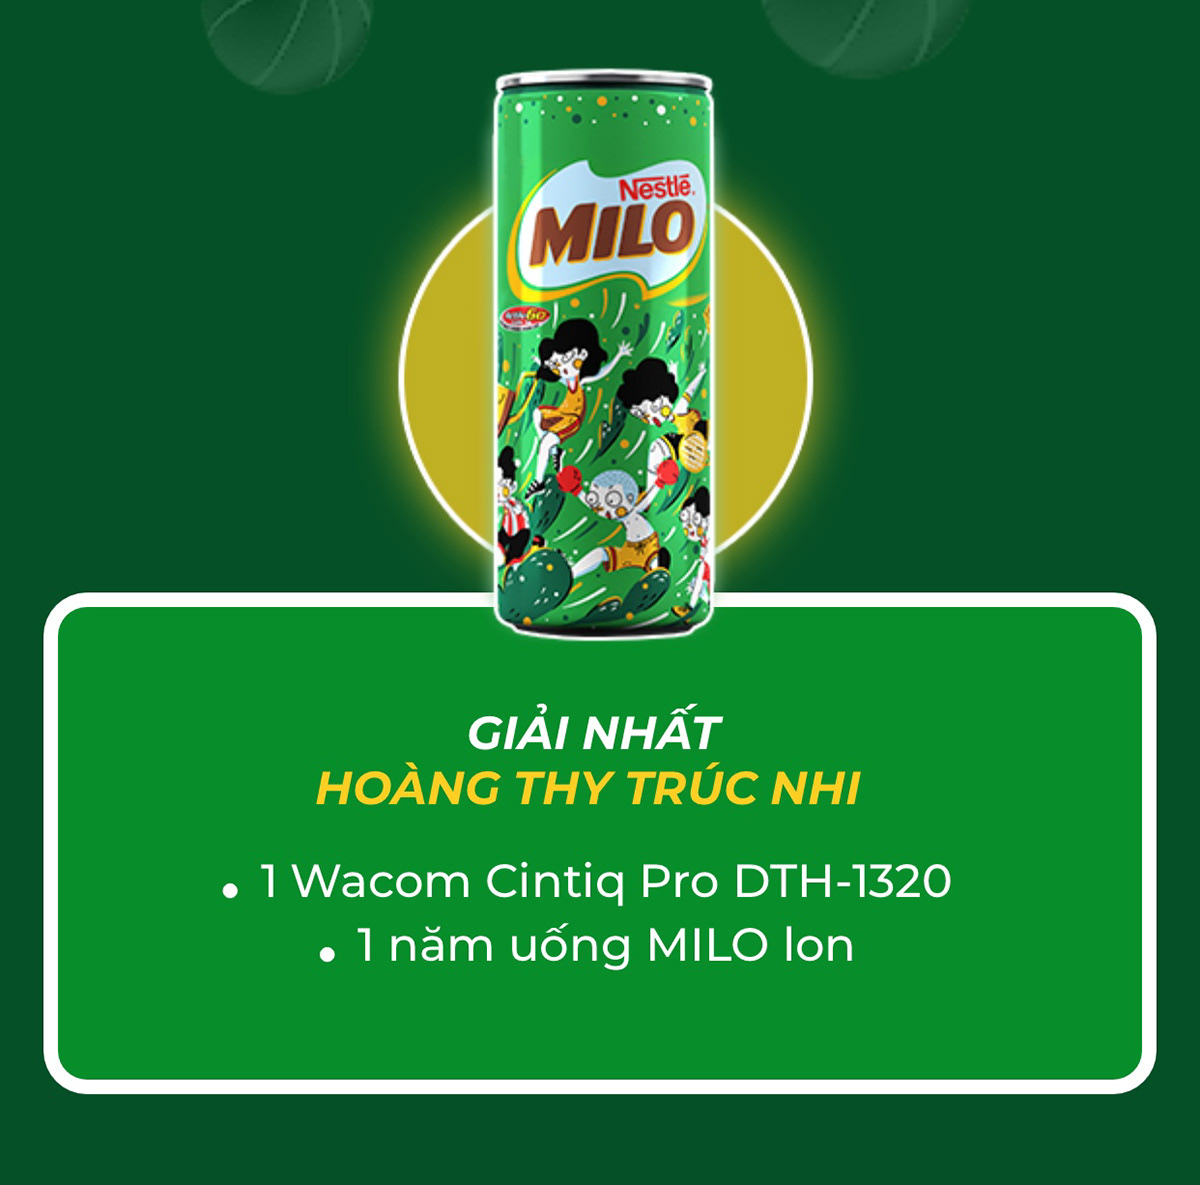 Milo Packaging can